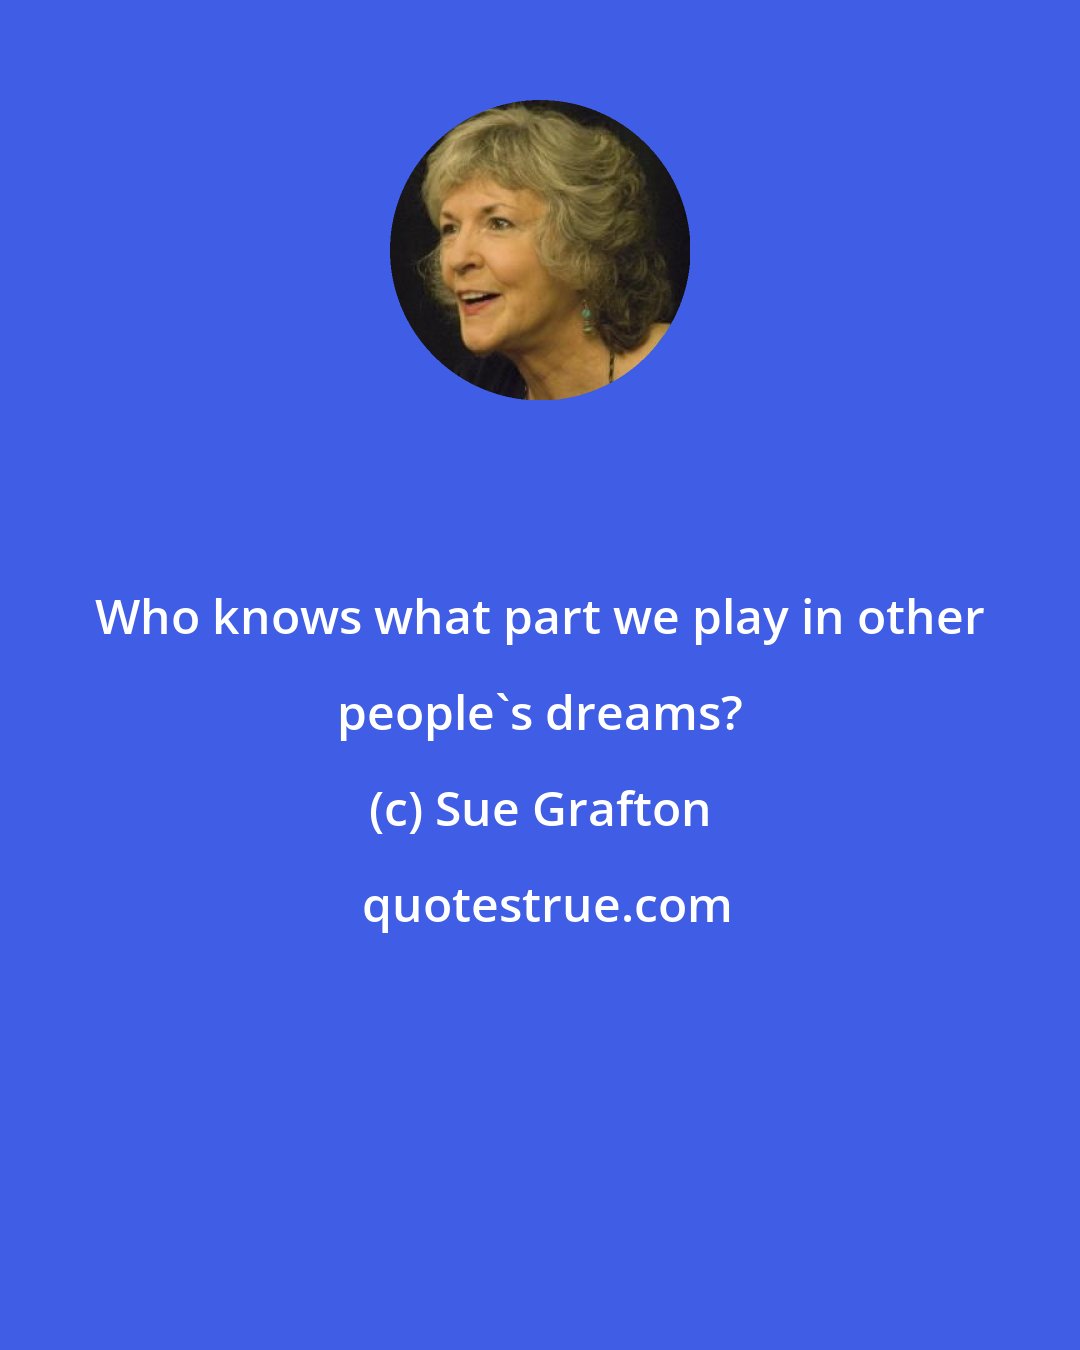 Sue Grafton: Who knows what part we play in other people's dreams?